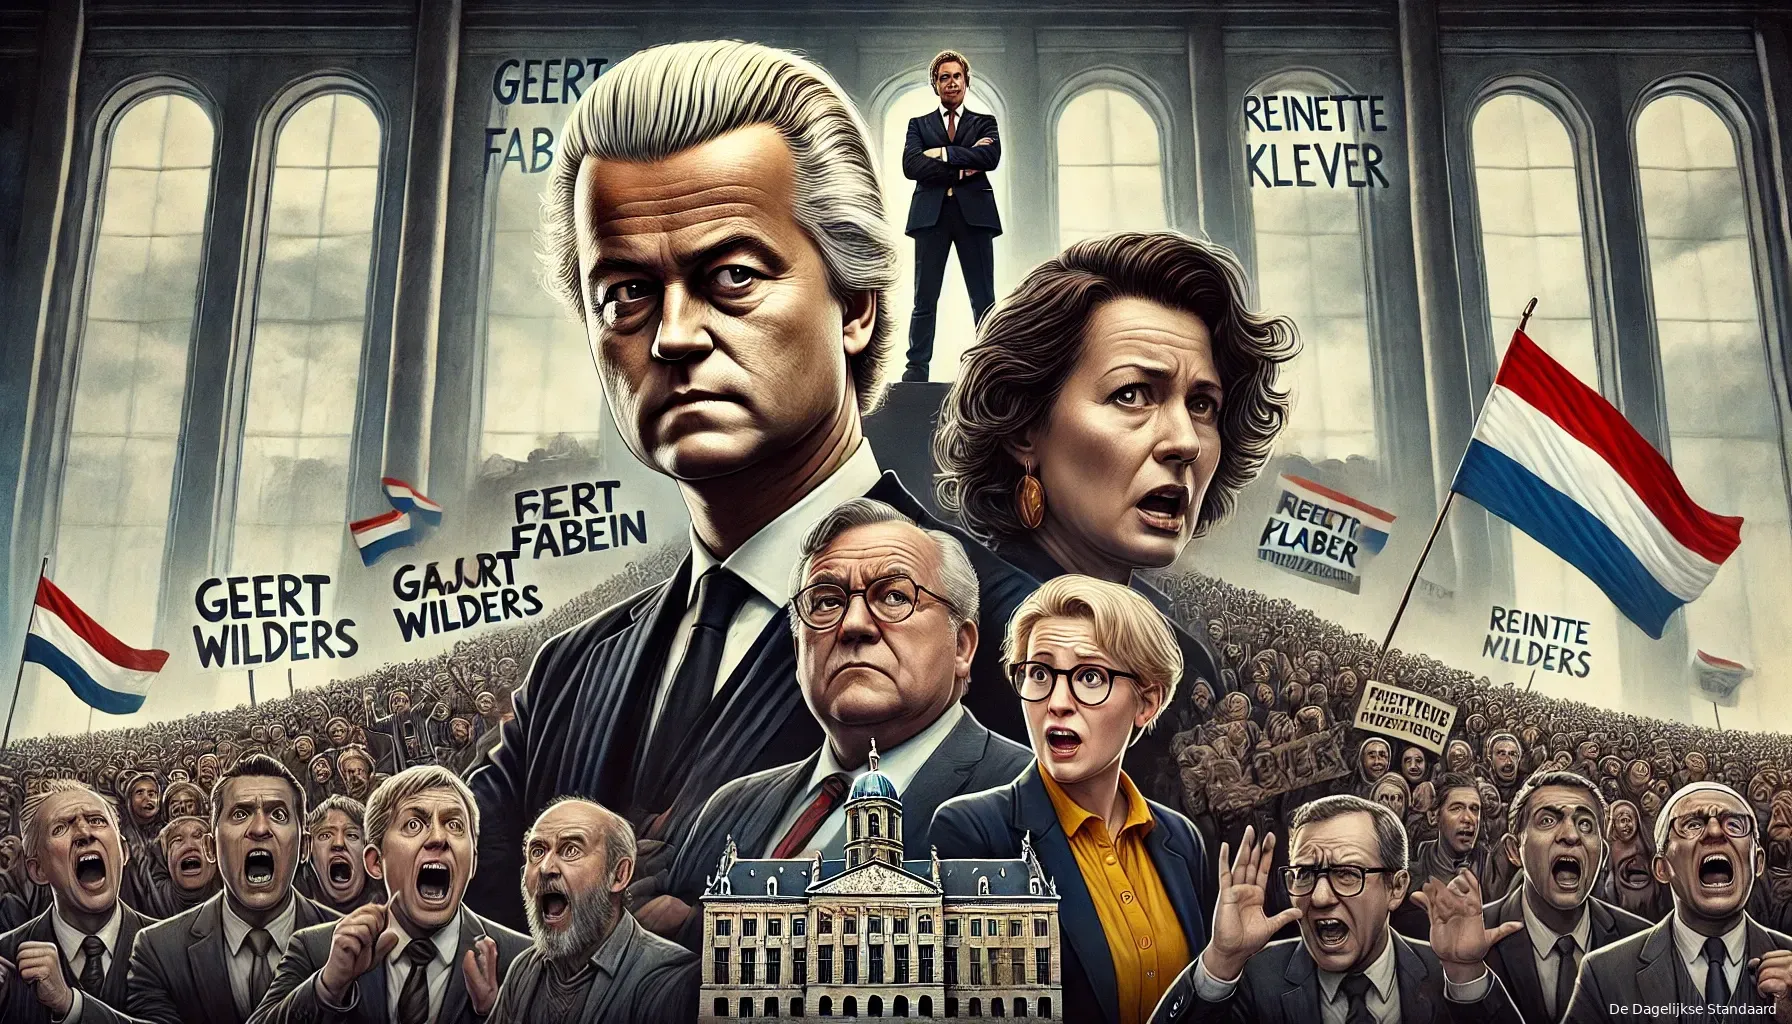 dalle 2024 06 25 093232 a dramatic political scene in the netherlands in the center are three politicians representing geert wilders marjolein faber and reinette klever l